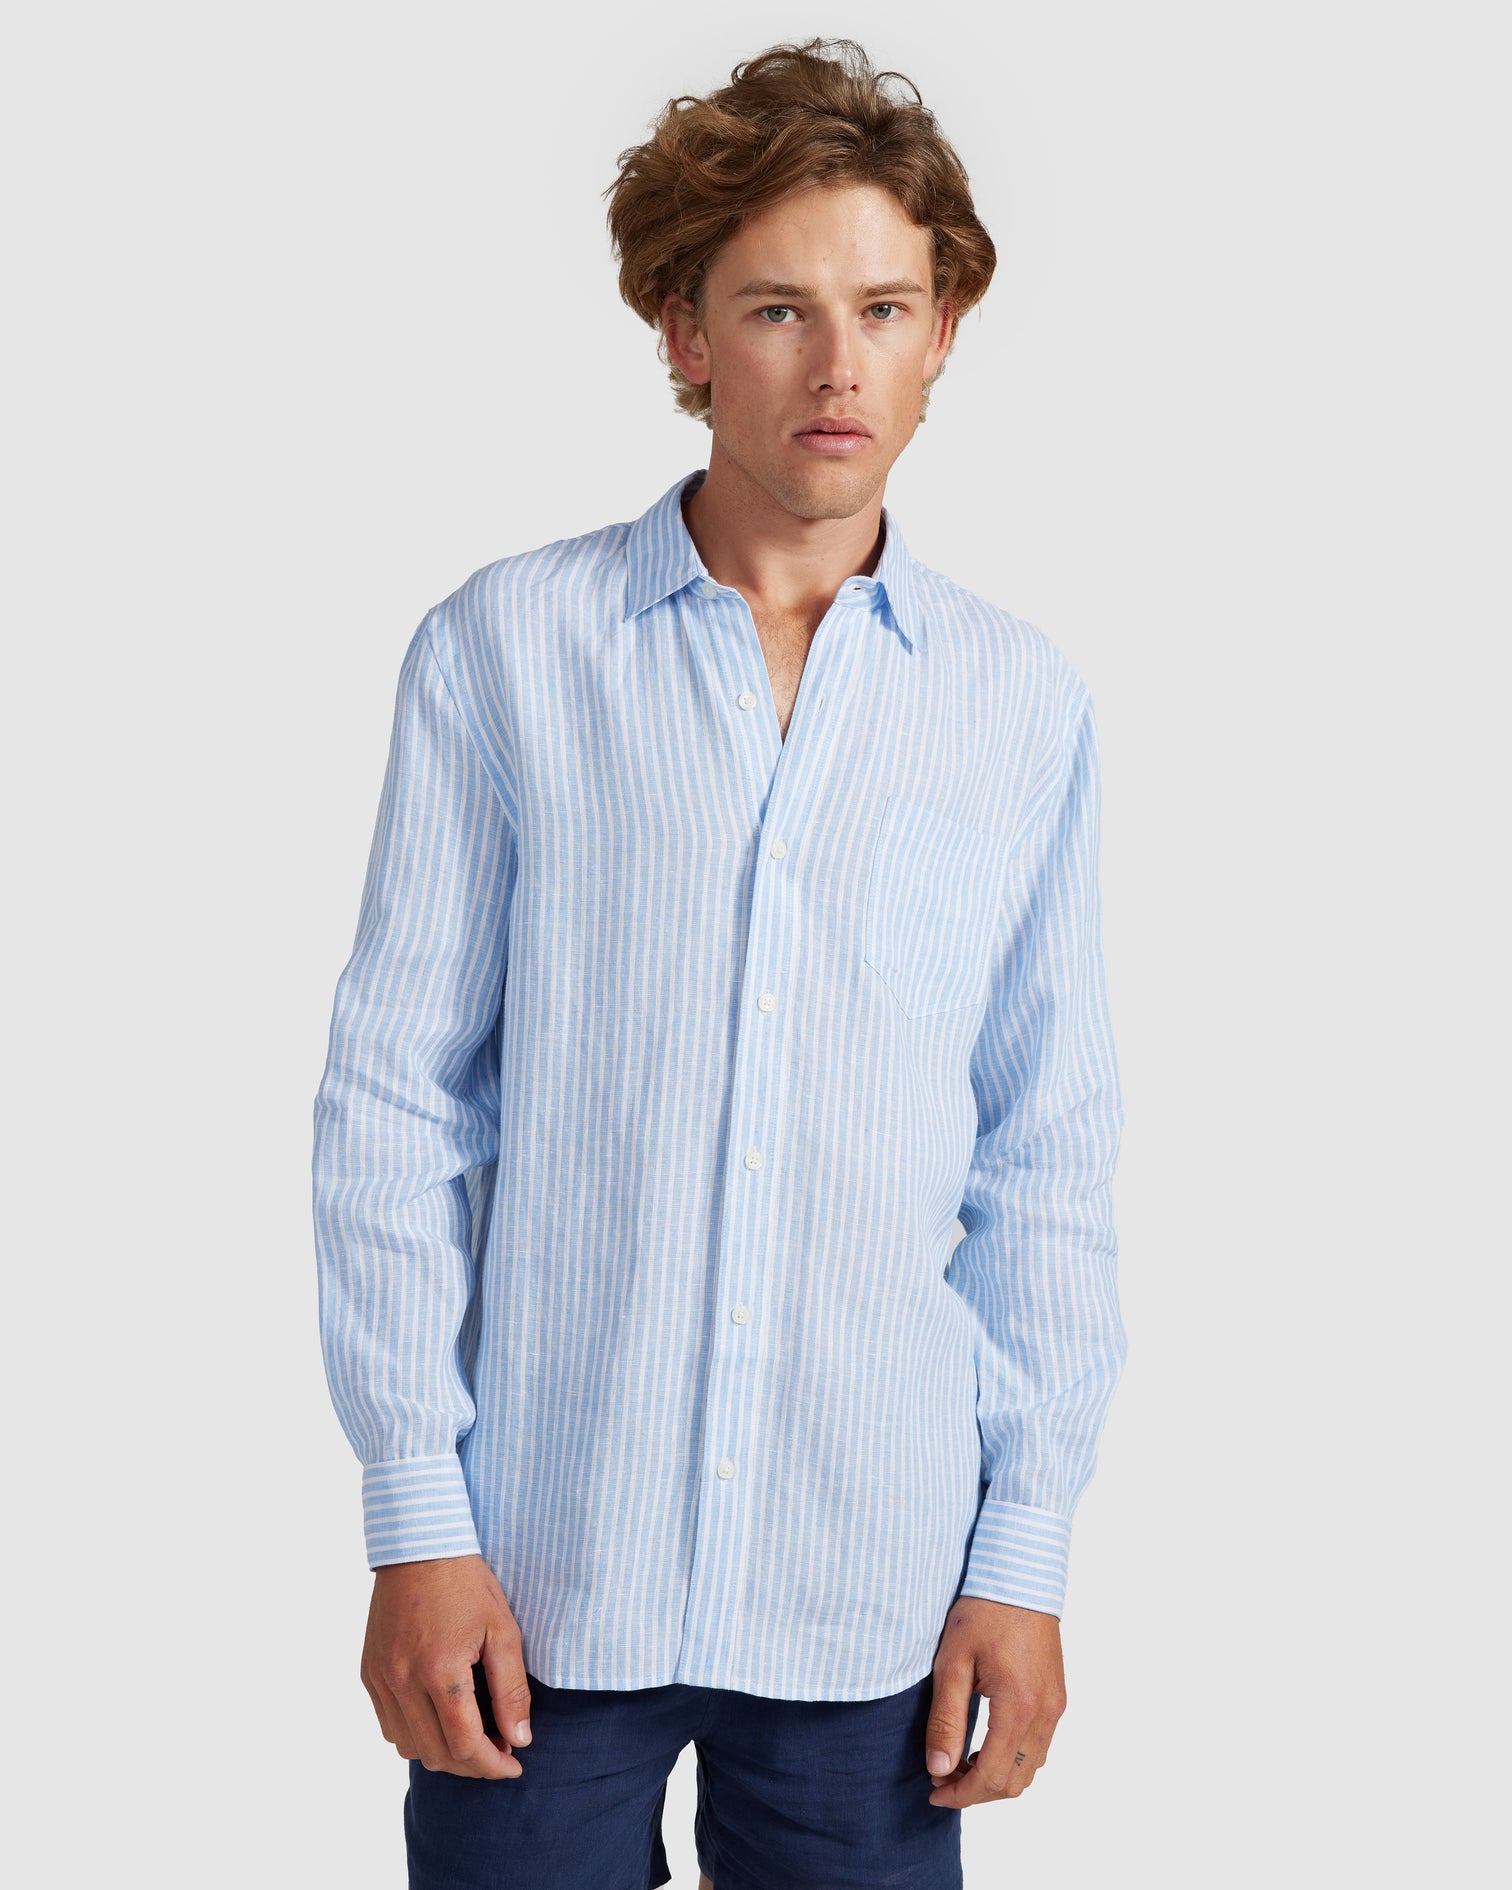 ORTC - Linen Shirt - Pale Blue and White Stripe | Label A